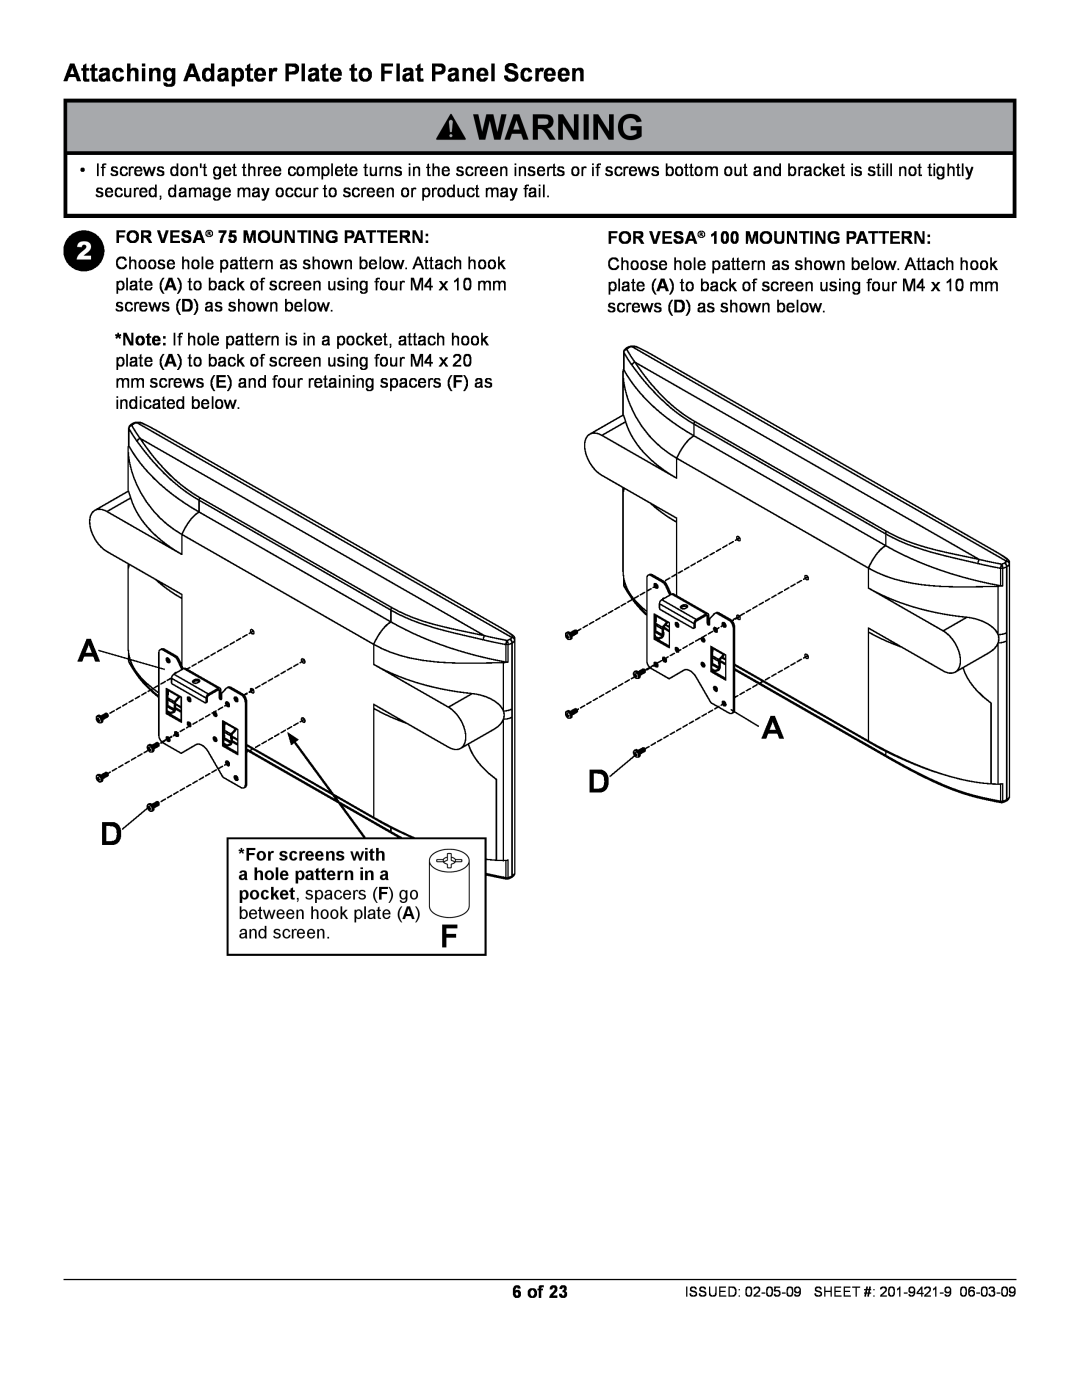 Peerless Industries ST630P Attaching Adapter Plate to Flat Panel Screen, FOR VESA 75 MOUNTING PATTERN, For screens with 